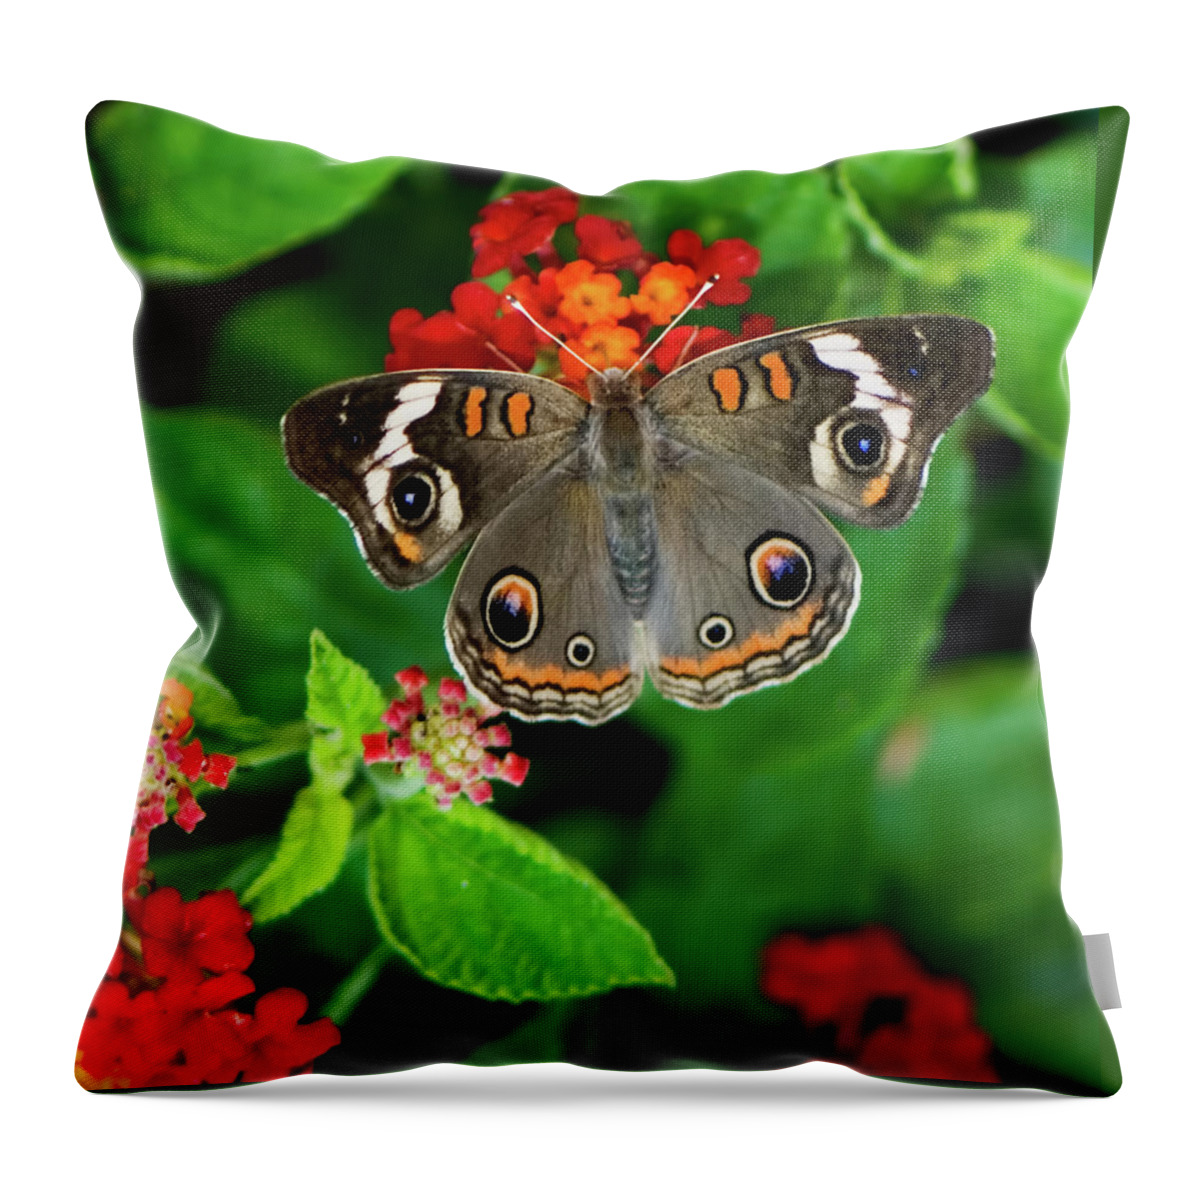 Butterfly Throw Pillow featuring the photograph Common Buckeye Butterfly by Betty LaRue